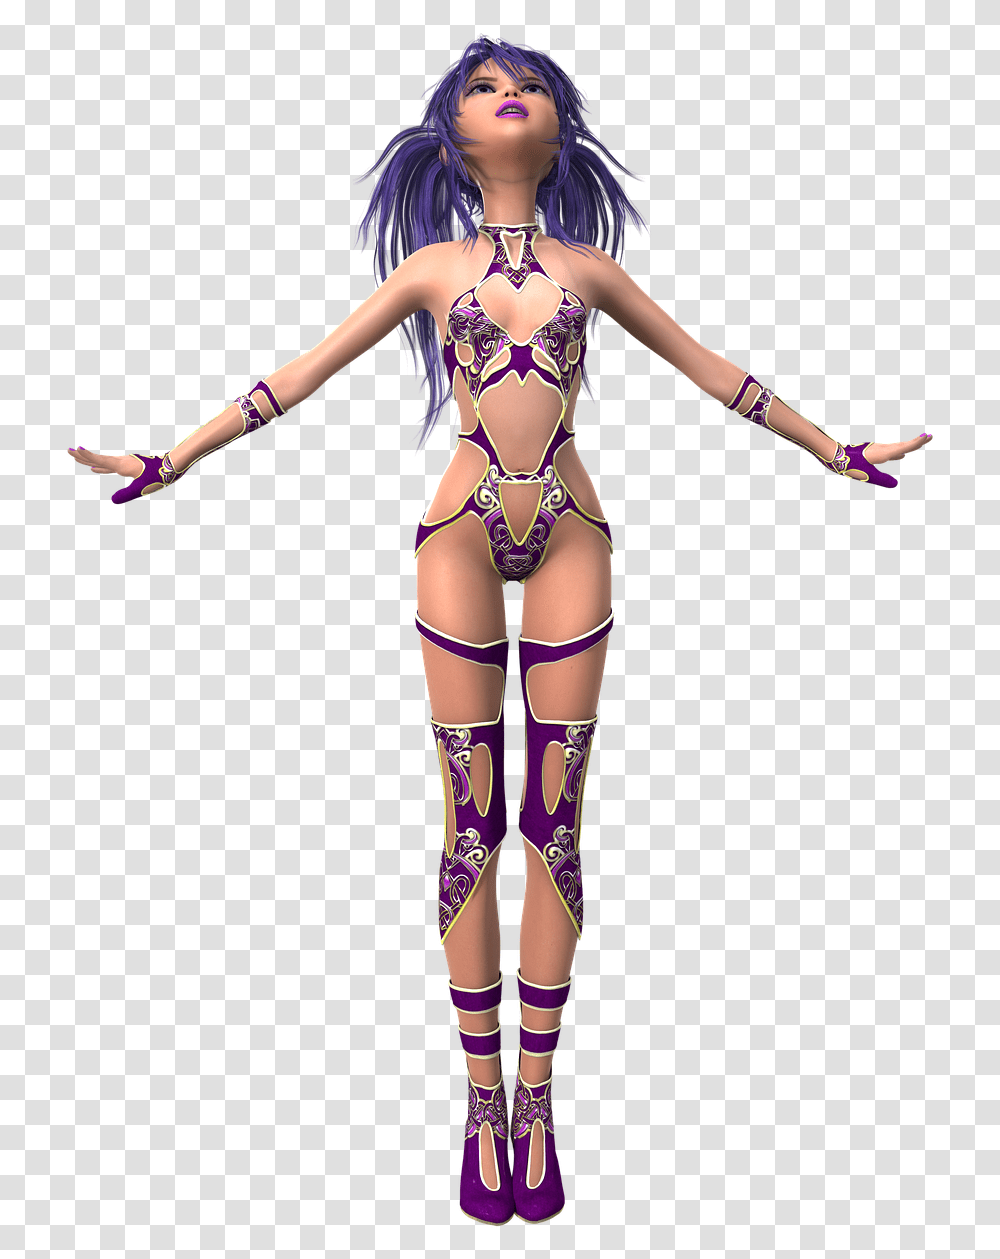 Toon Female Clothing Sexy Woman Image Toon Woman, Costume, Person, Human, Apparel Transparent Png